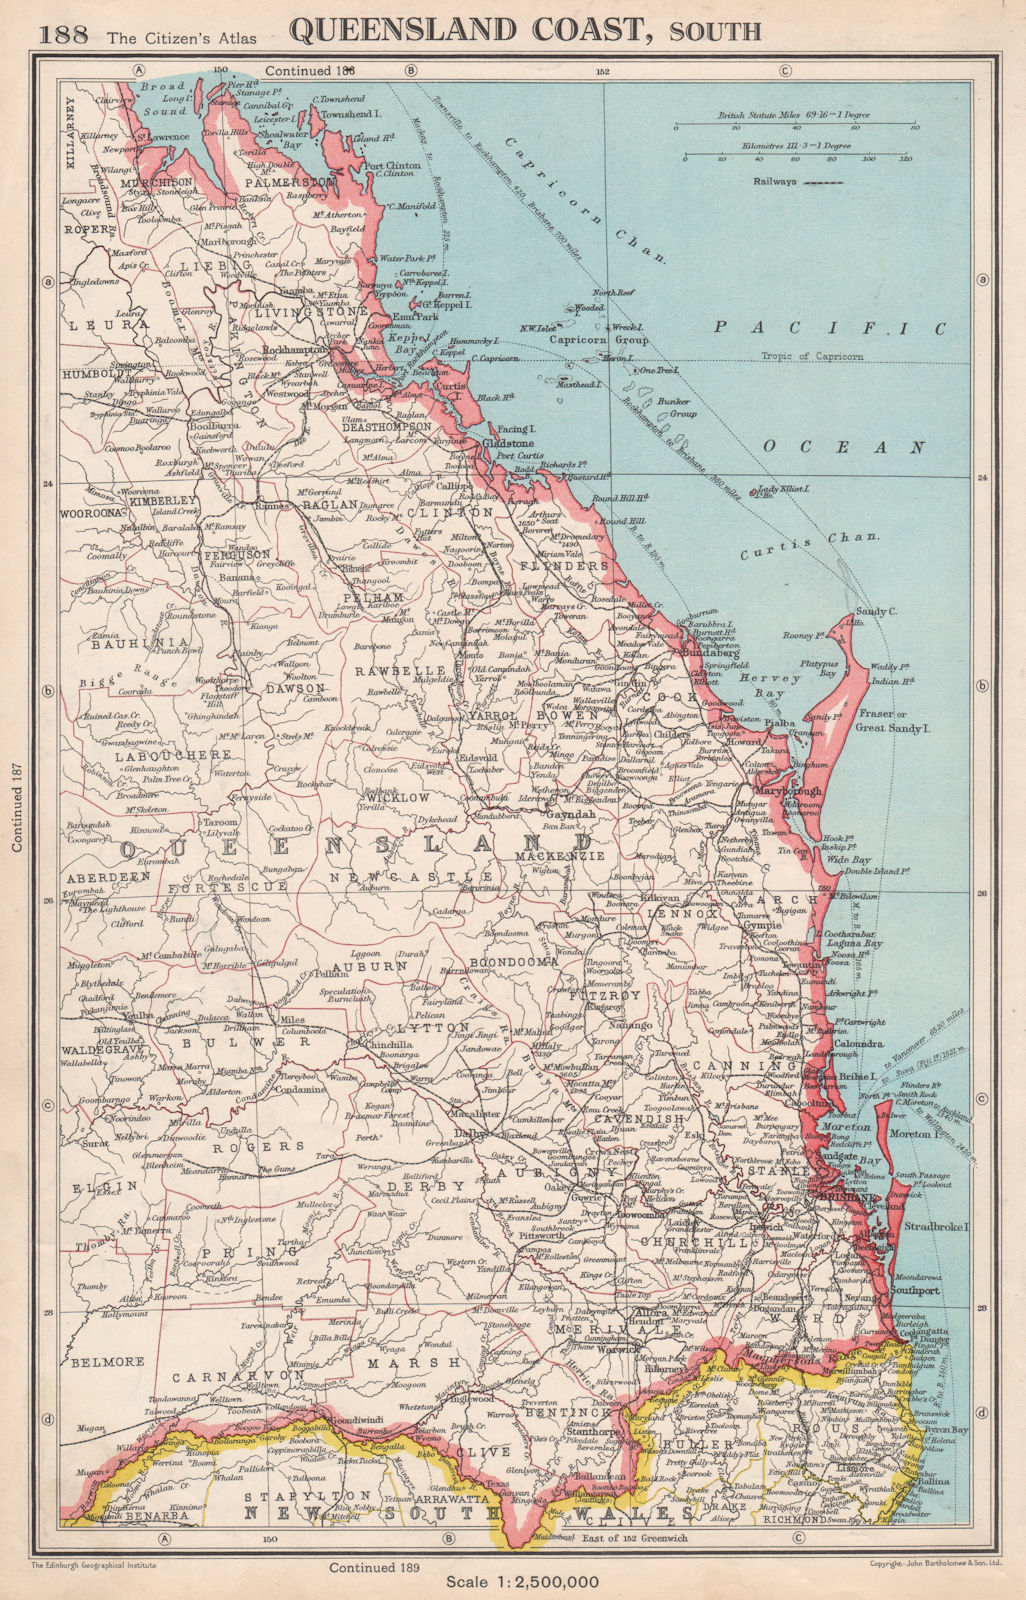 QUEENSLAND COAST, SOUTH. showing counties. BARTHOLOMEW 1952 old vintage map